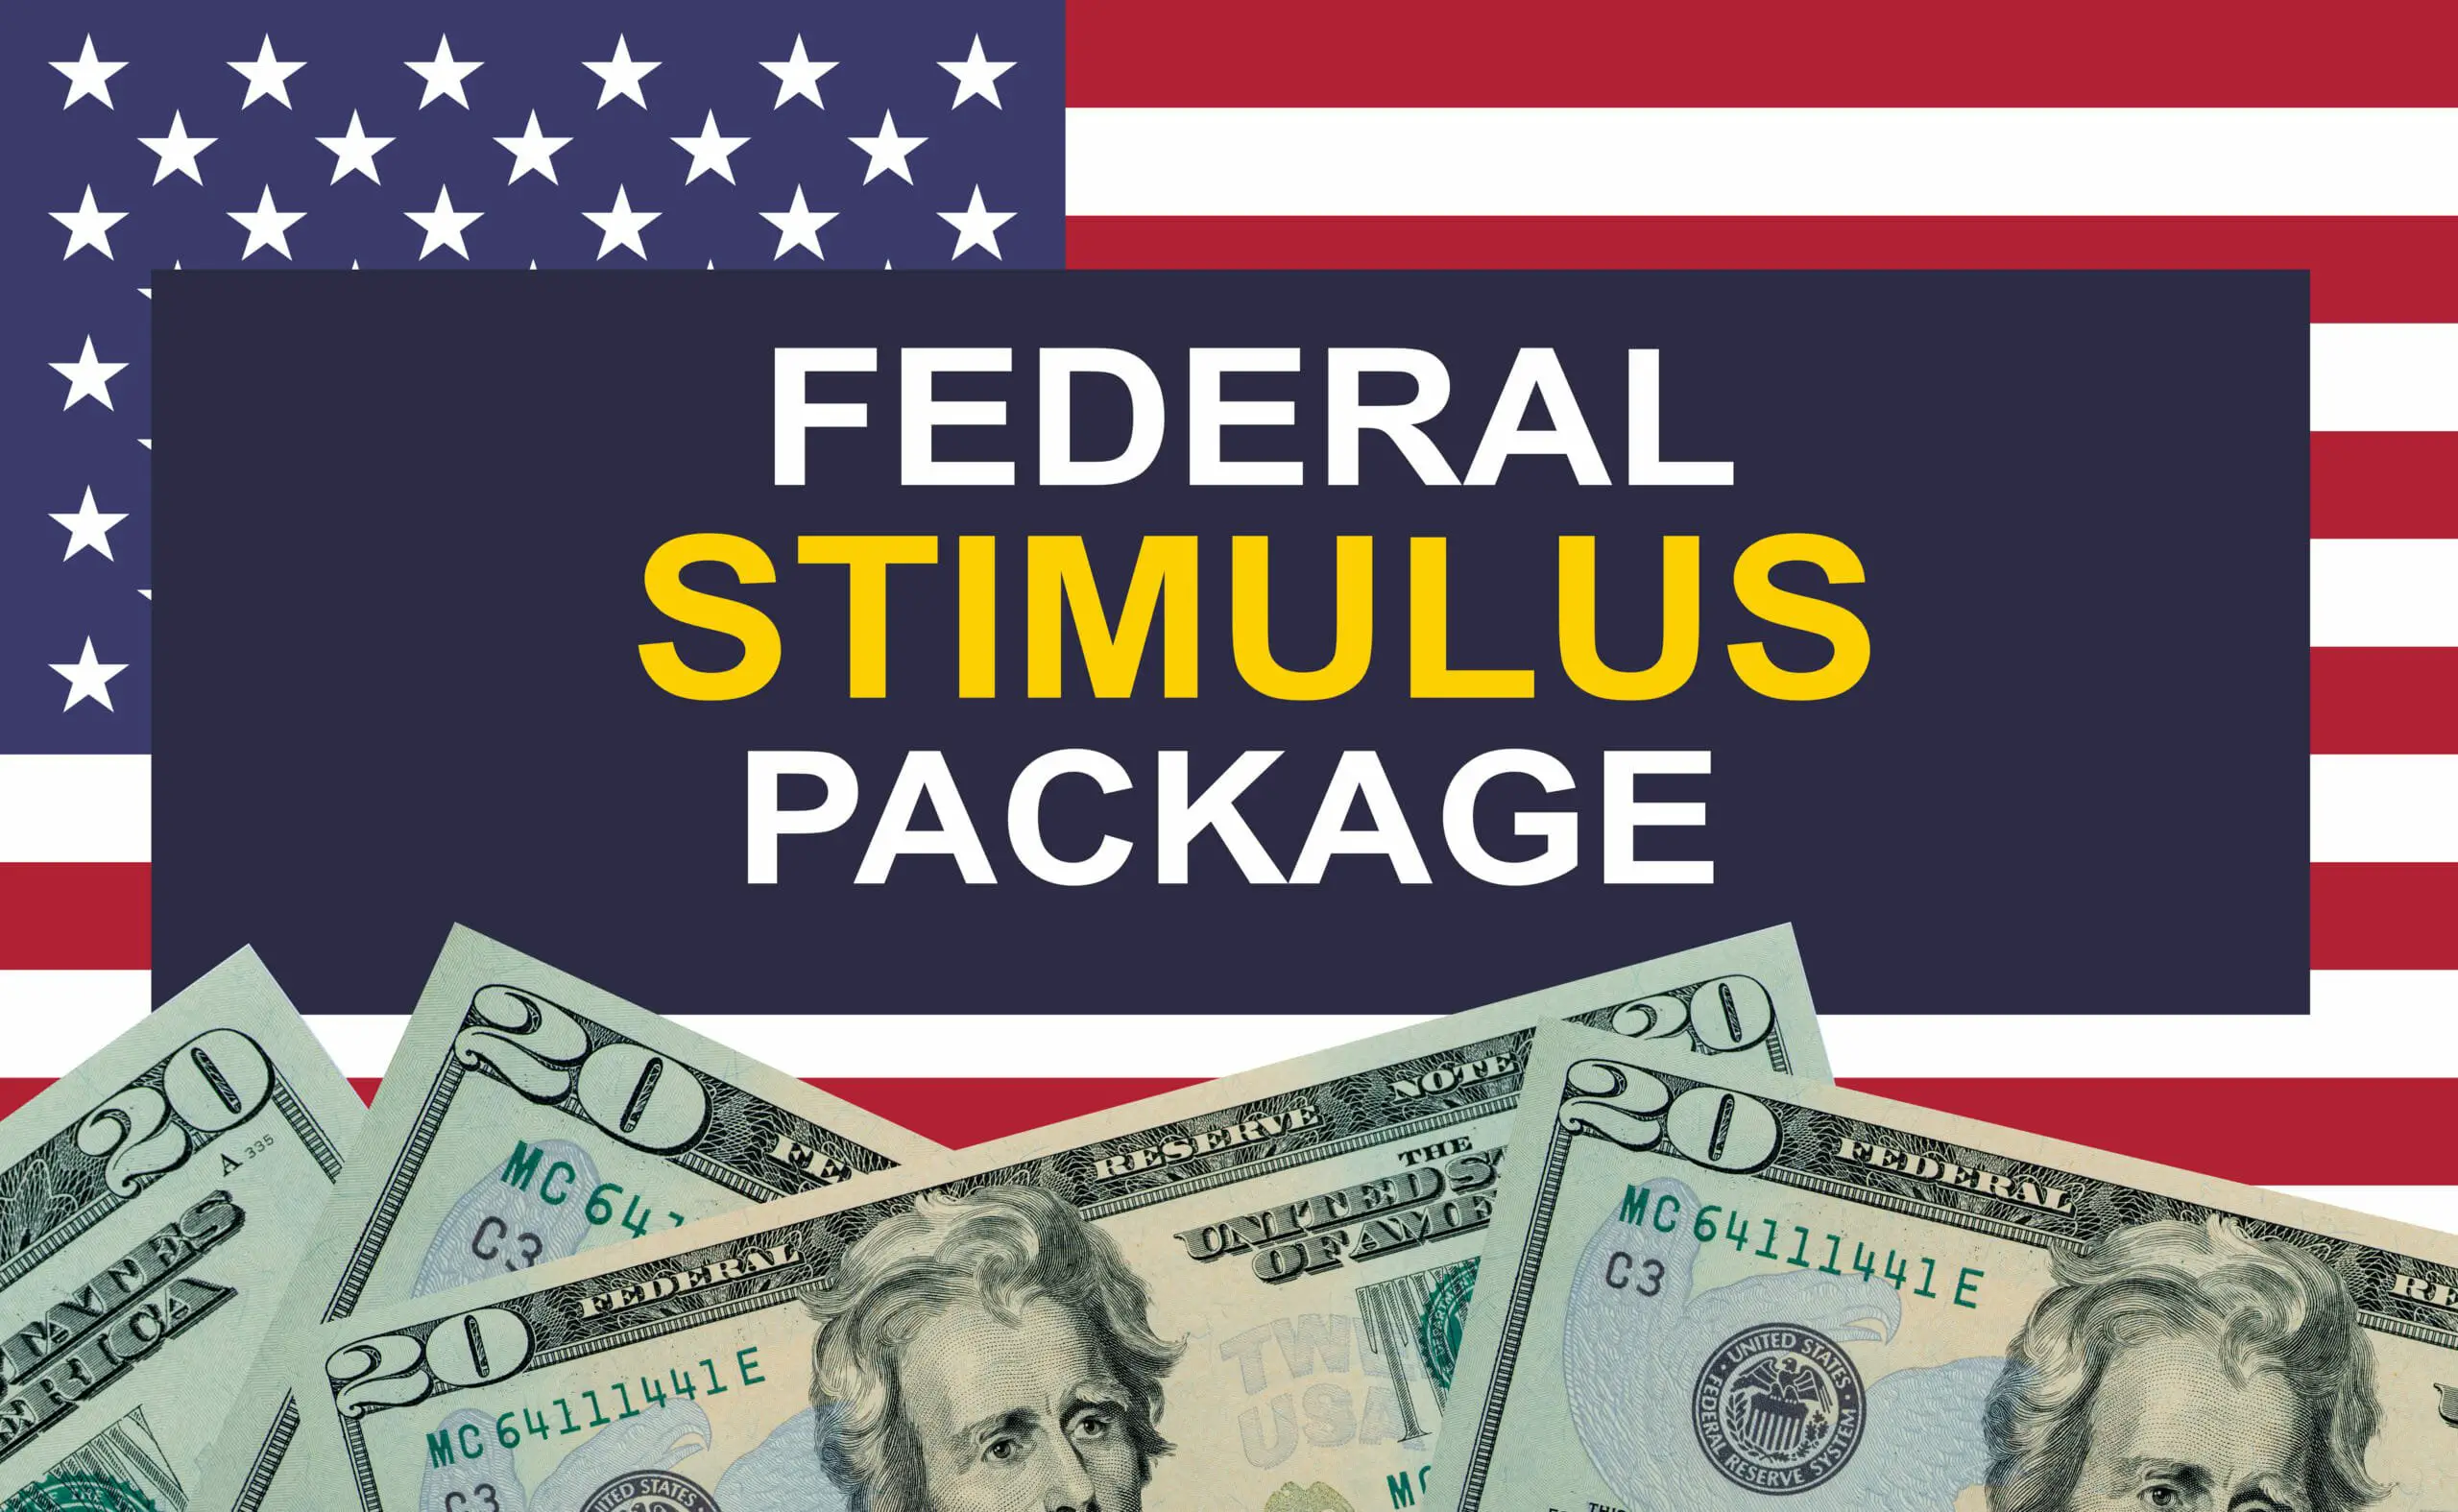 Highlights of the Federal Stimulus Program